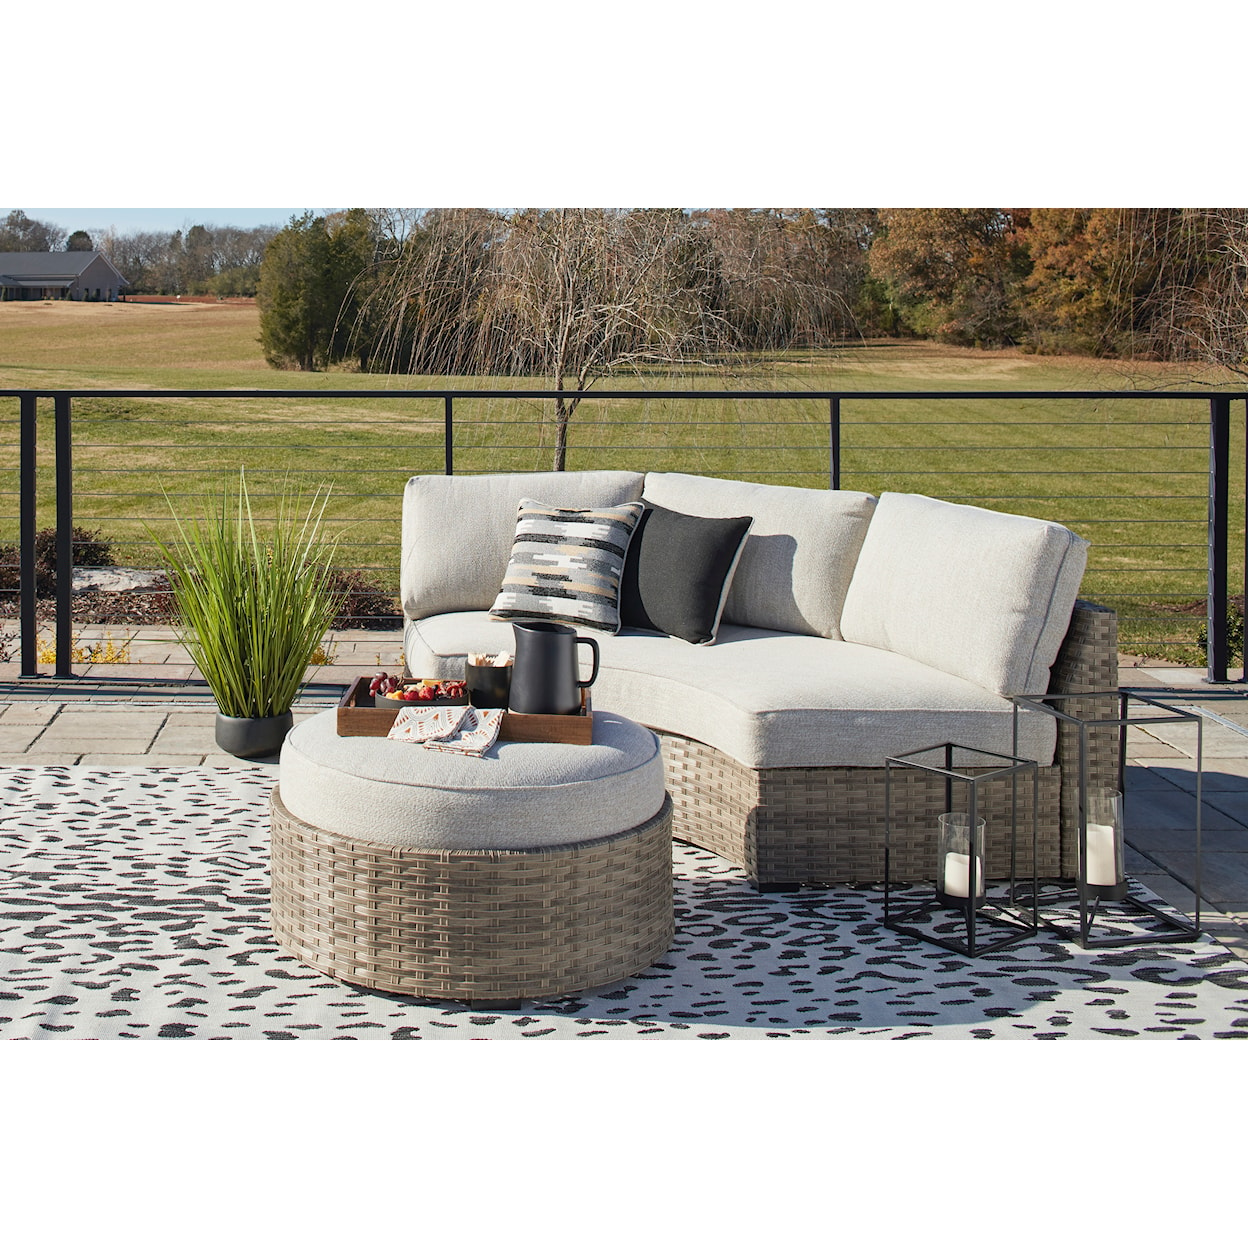 Signature Design by Ashley Calworth Outdoor Curved Loveseat with Cushion